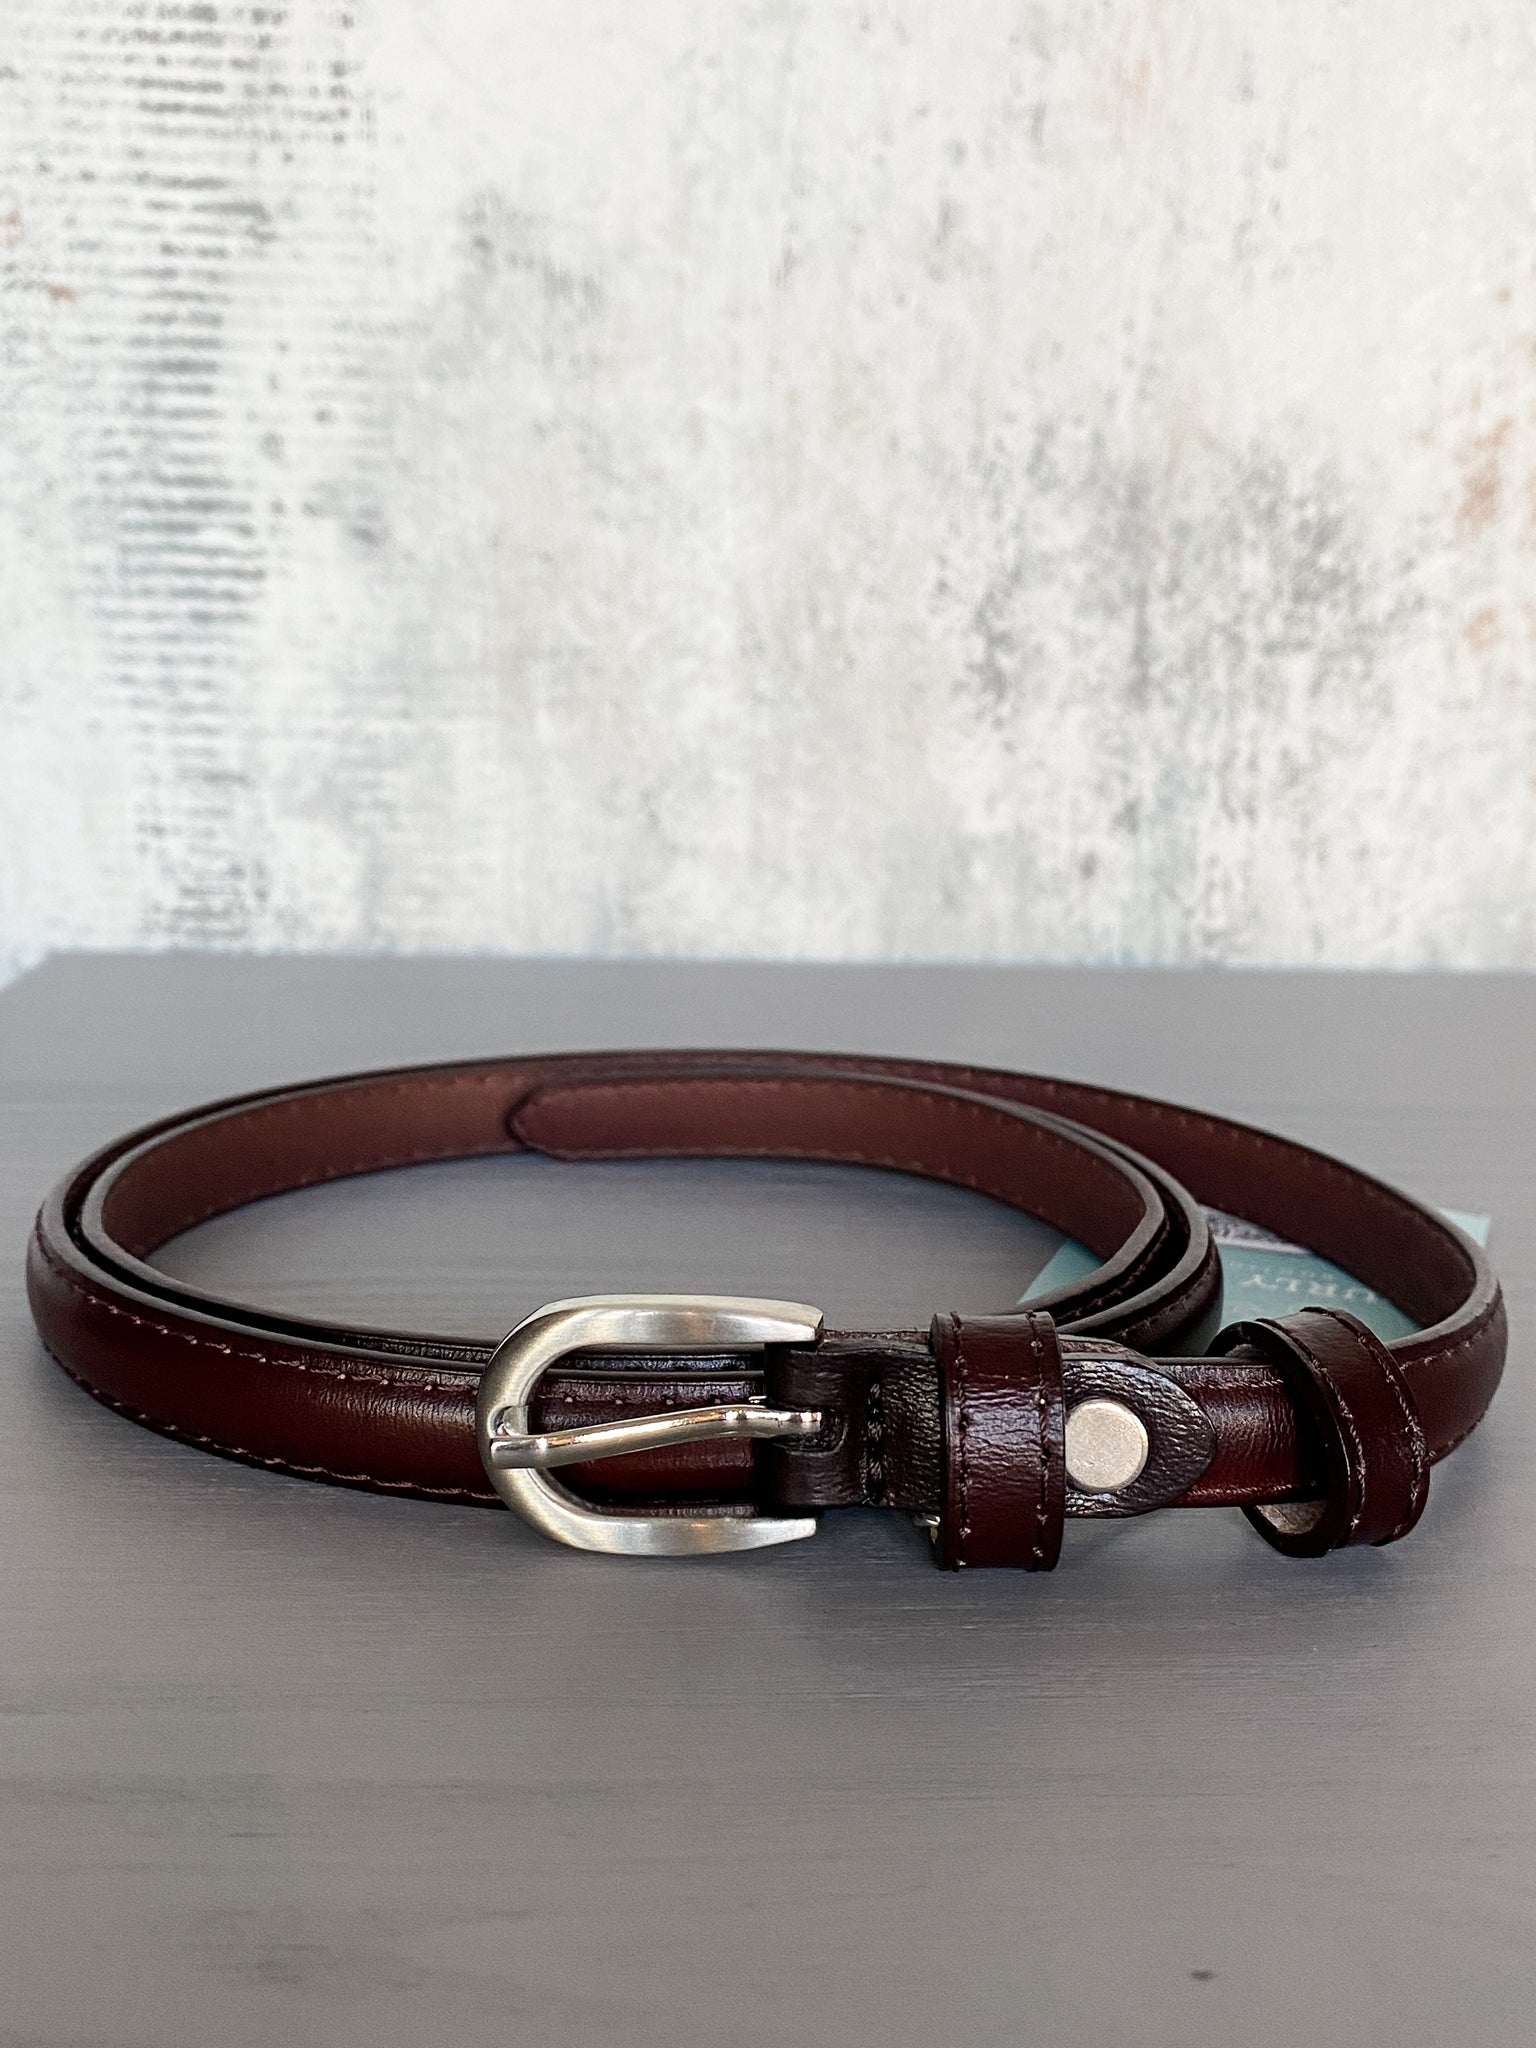 Skinny Horseshoe Buckle Cinch Leather Belt - Comes in 3 Colors